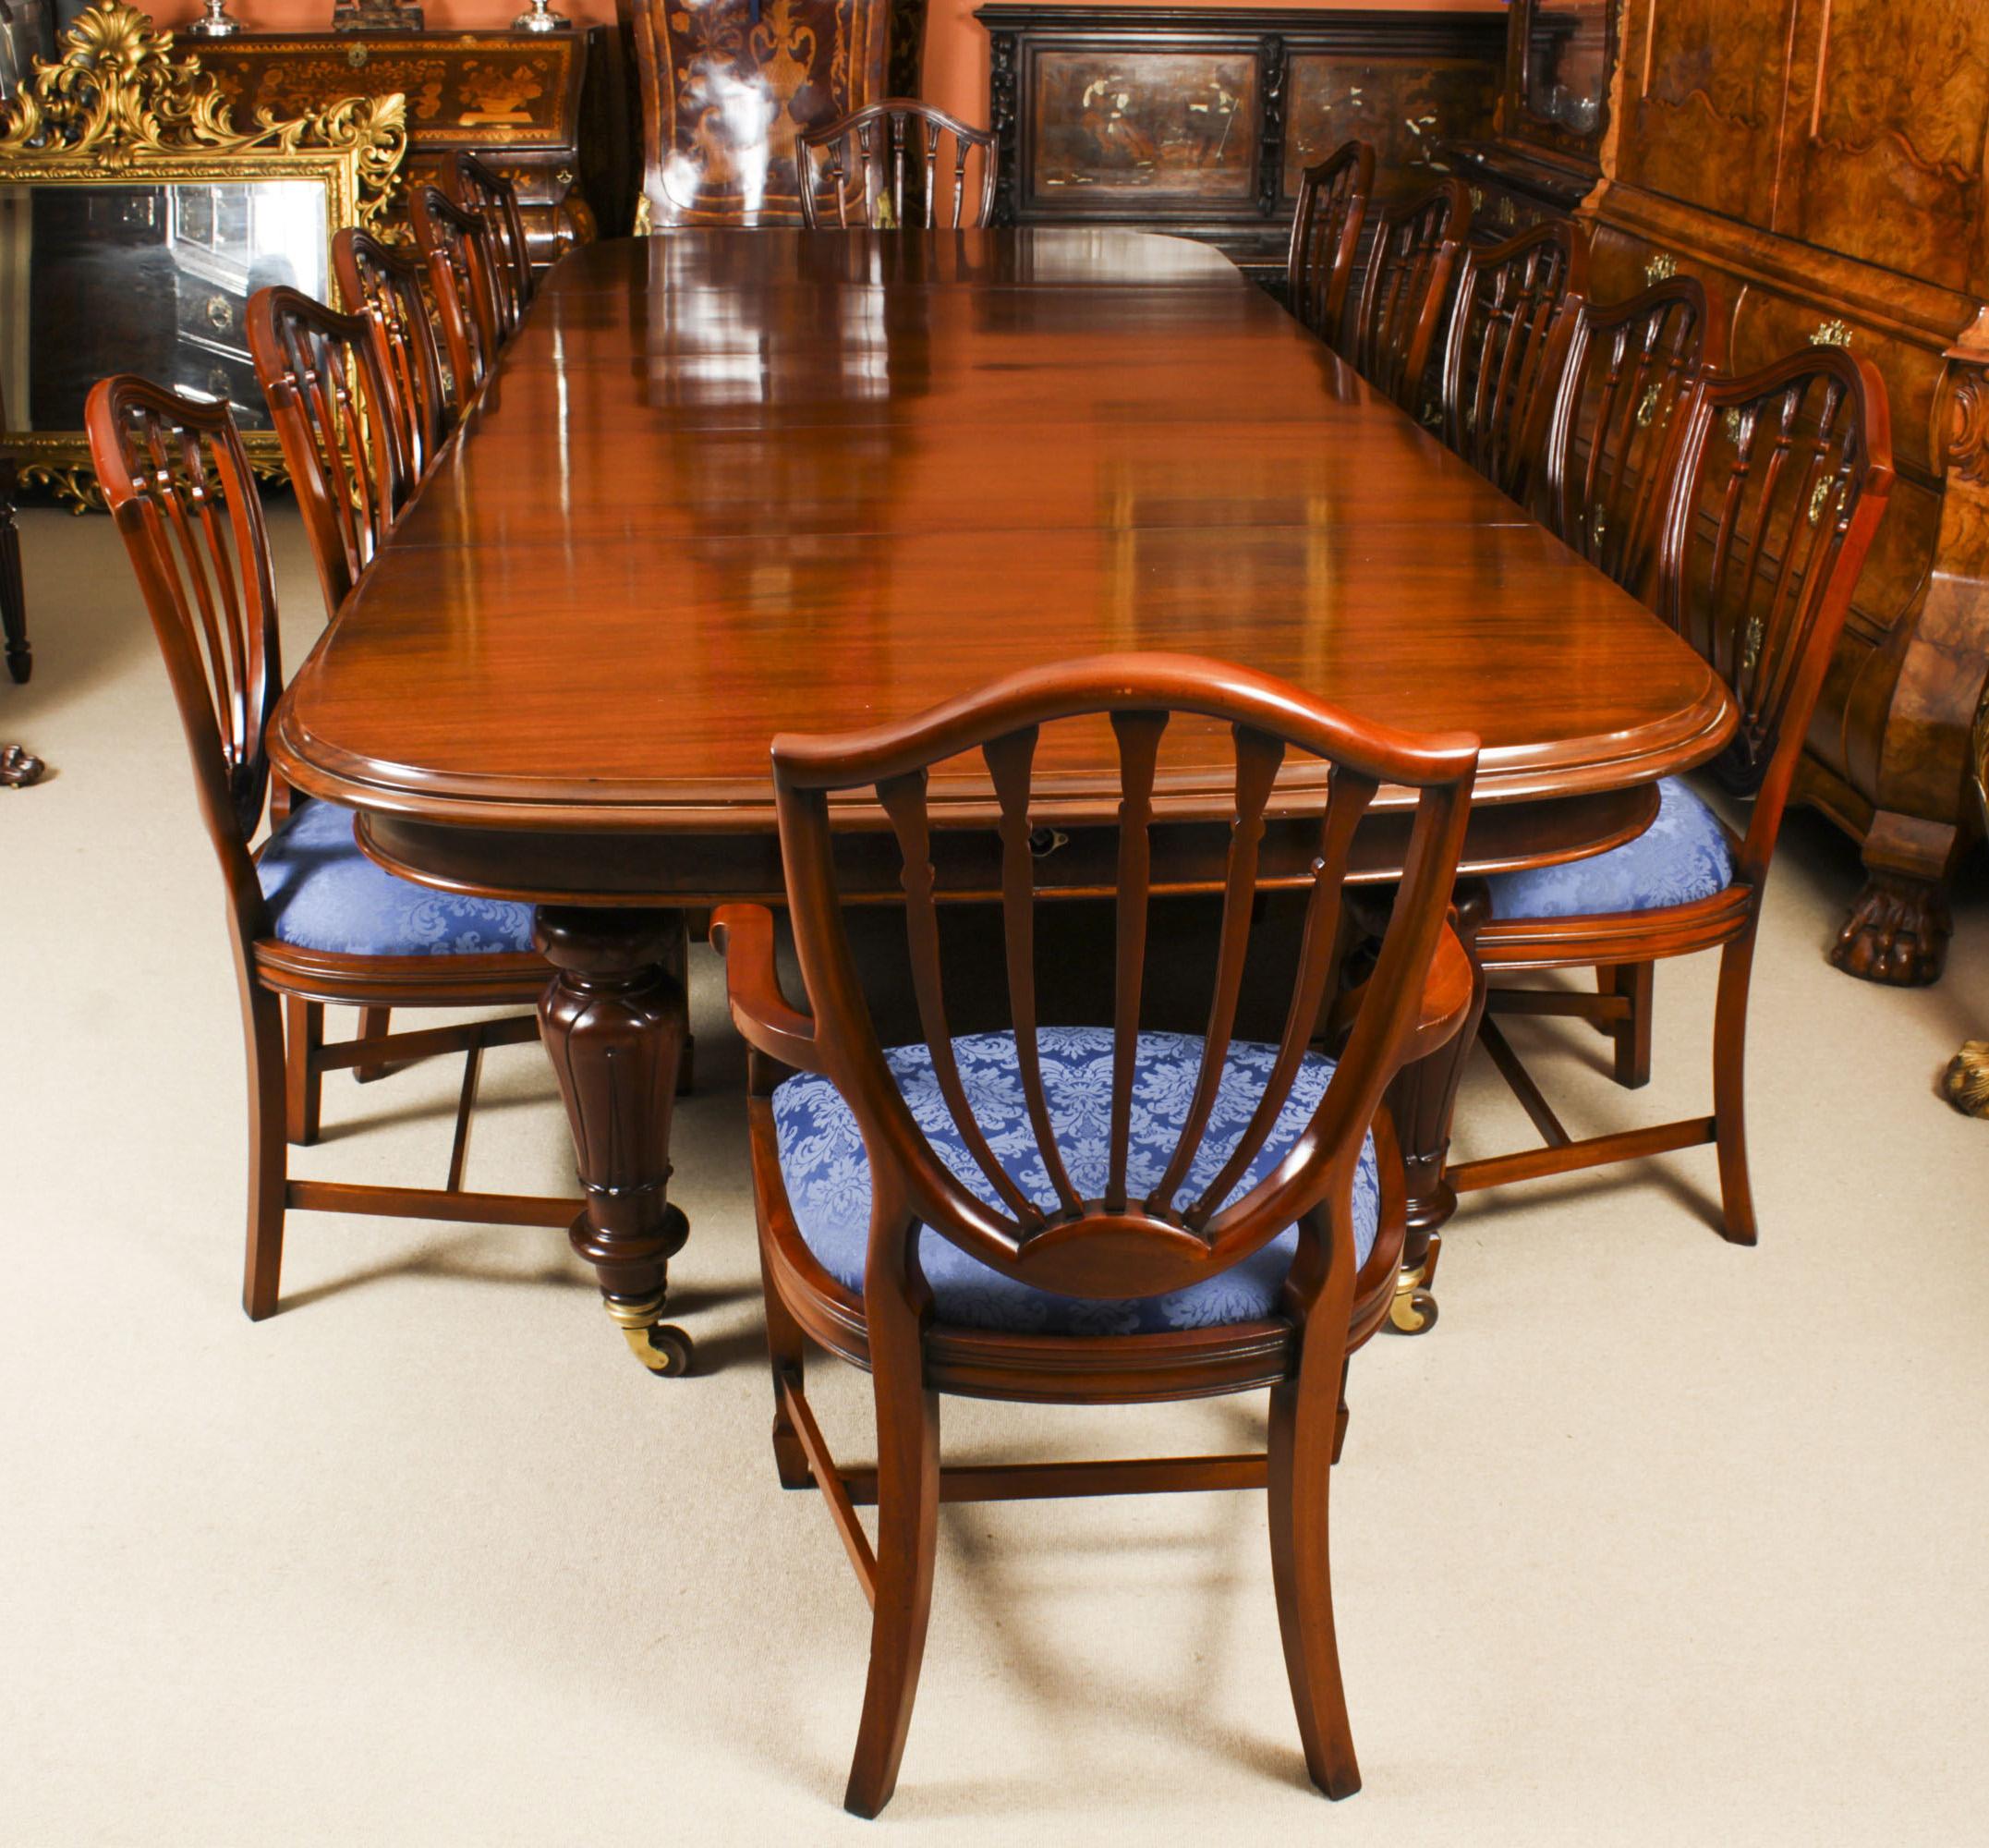 This is a magnificent antique Victorian mahogany D-end dining table circa 1850 in date and 12 baloon back chairs.
 
This beautiful table is in stunning solid flame mahogany and can seat twelve diners in comfort. It has three original leaves, 2x